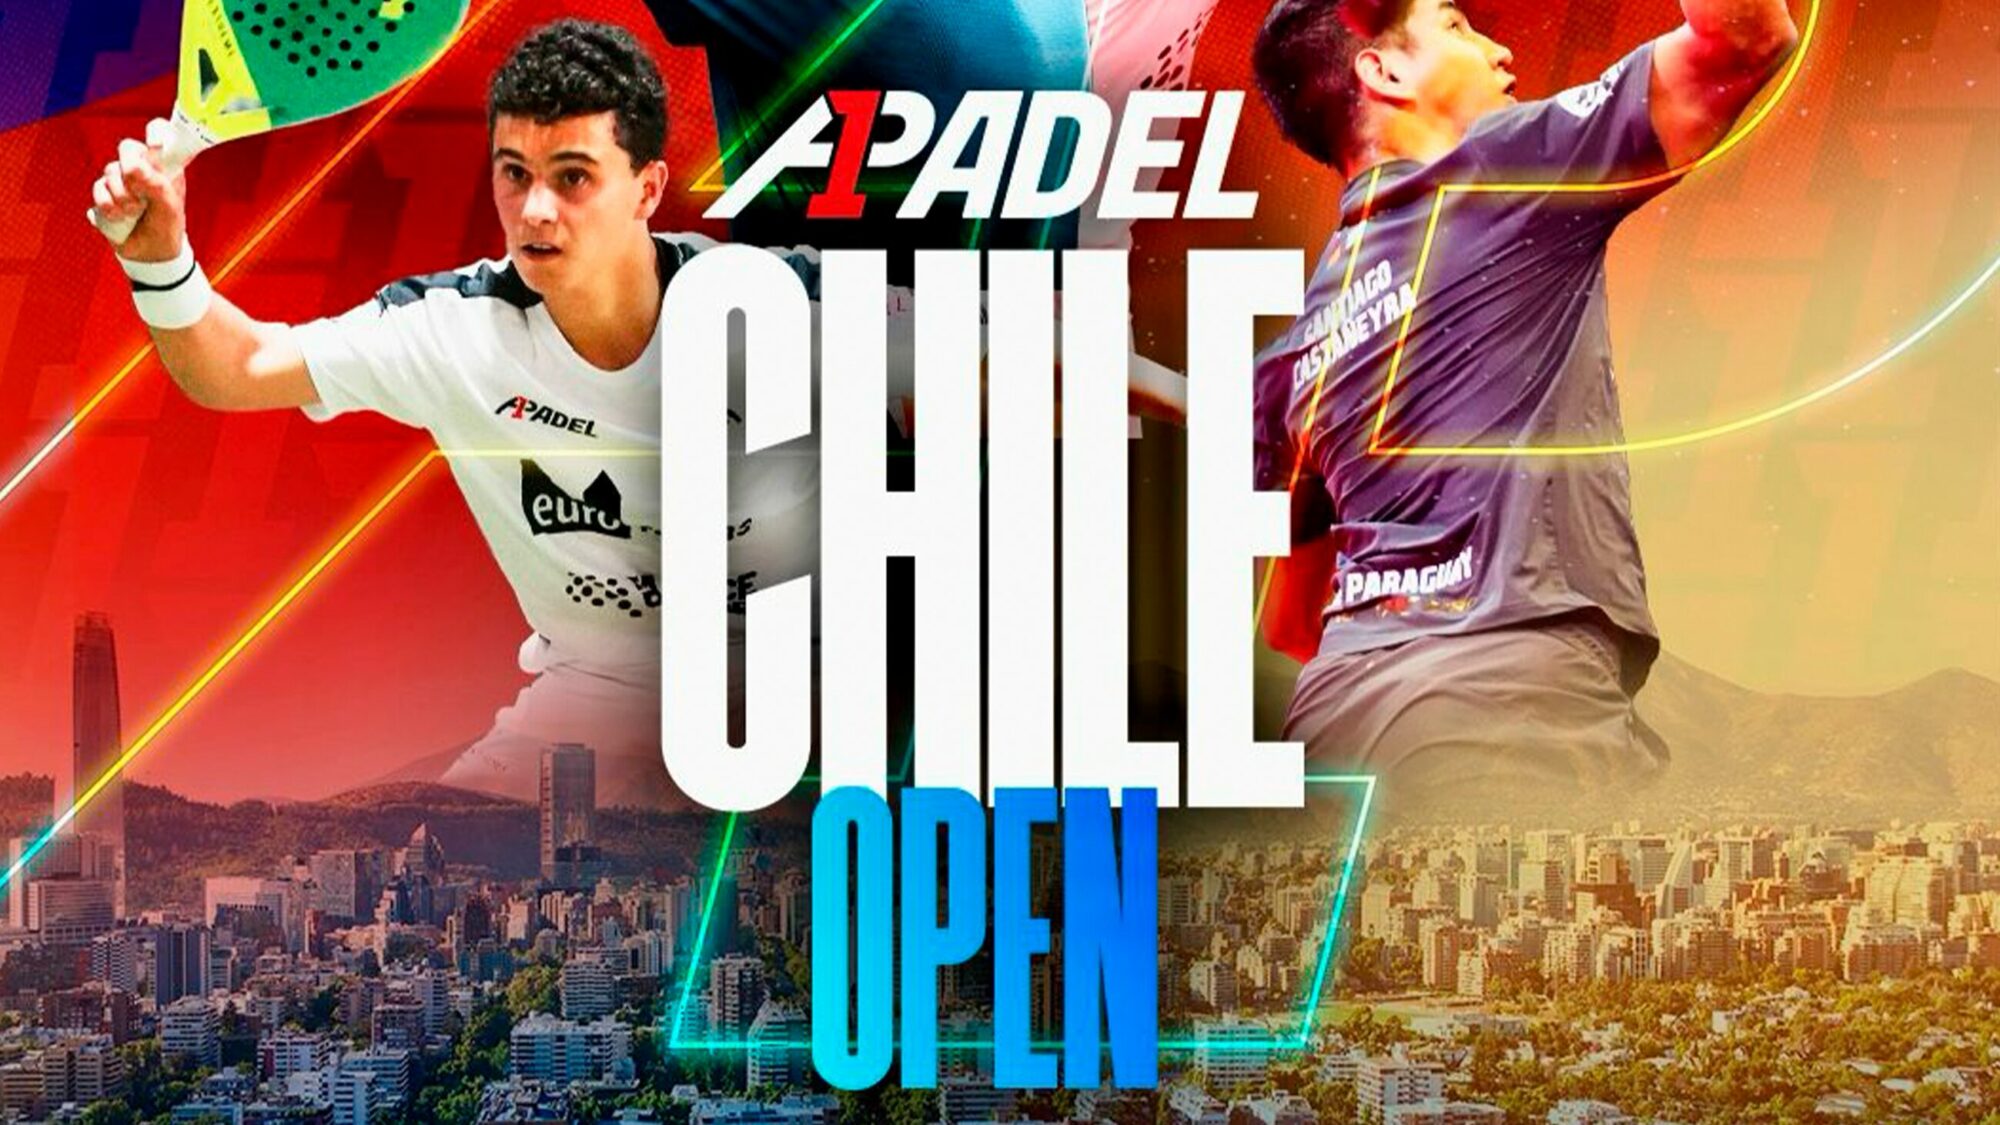 A1 Chile Open – Hoofdtoernooi onthuld